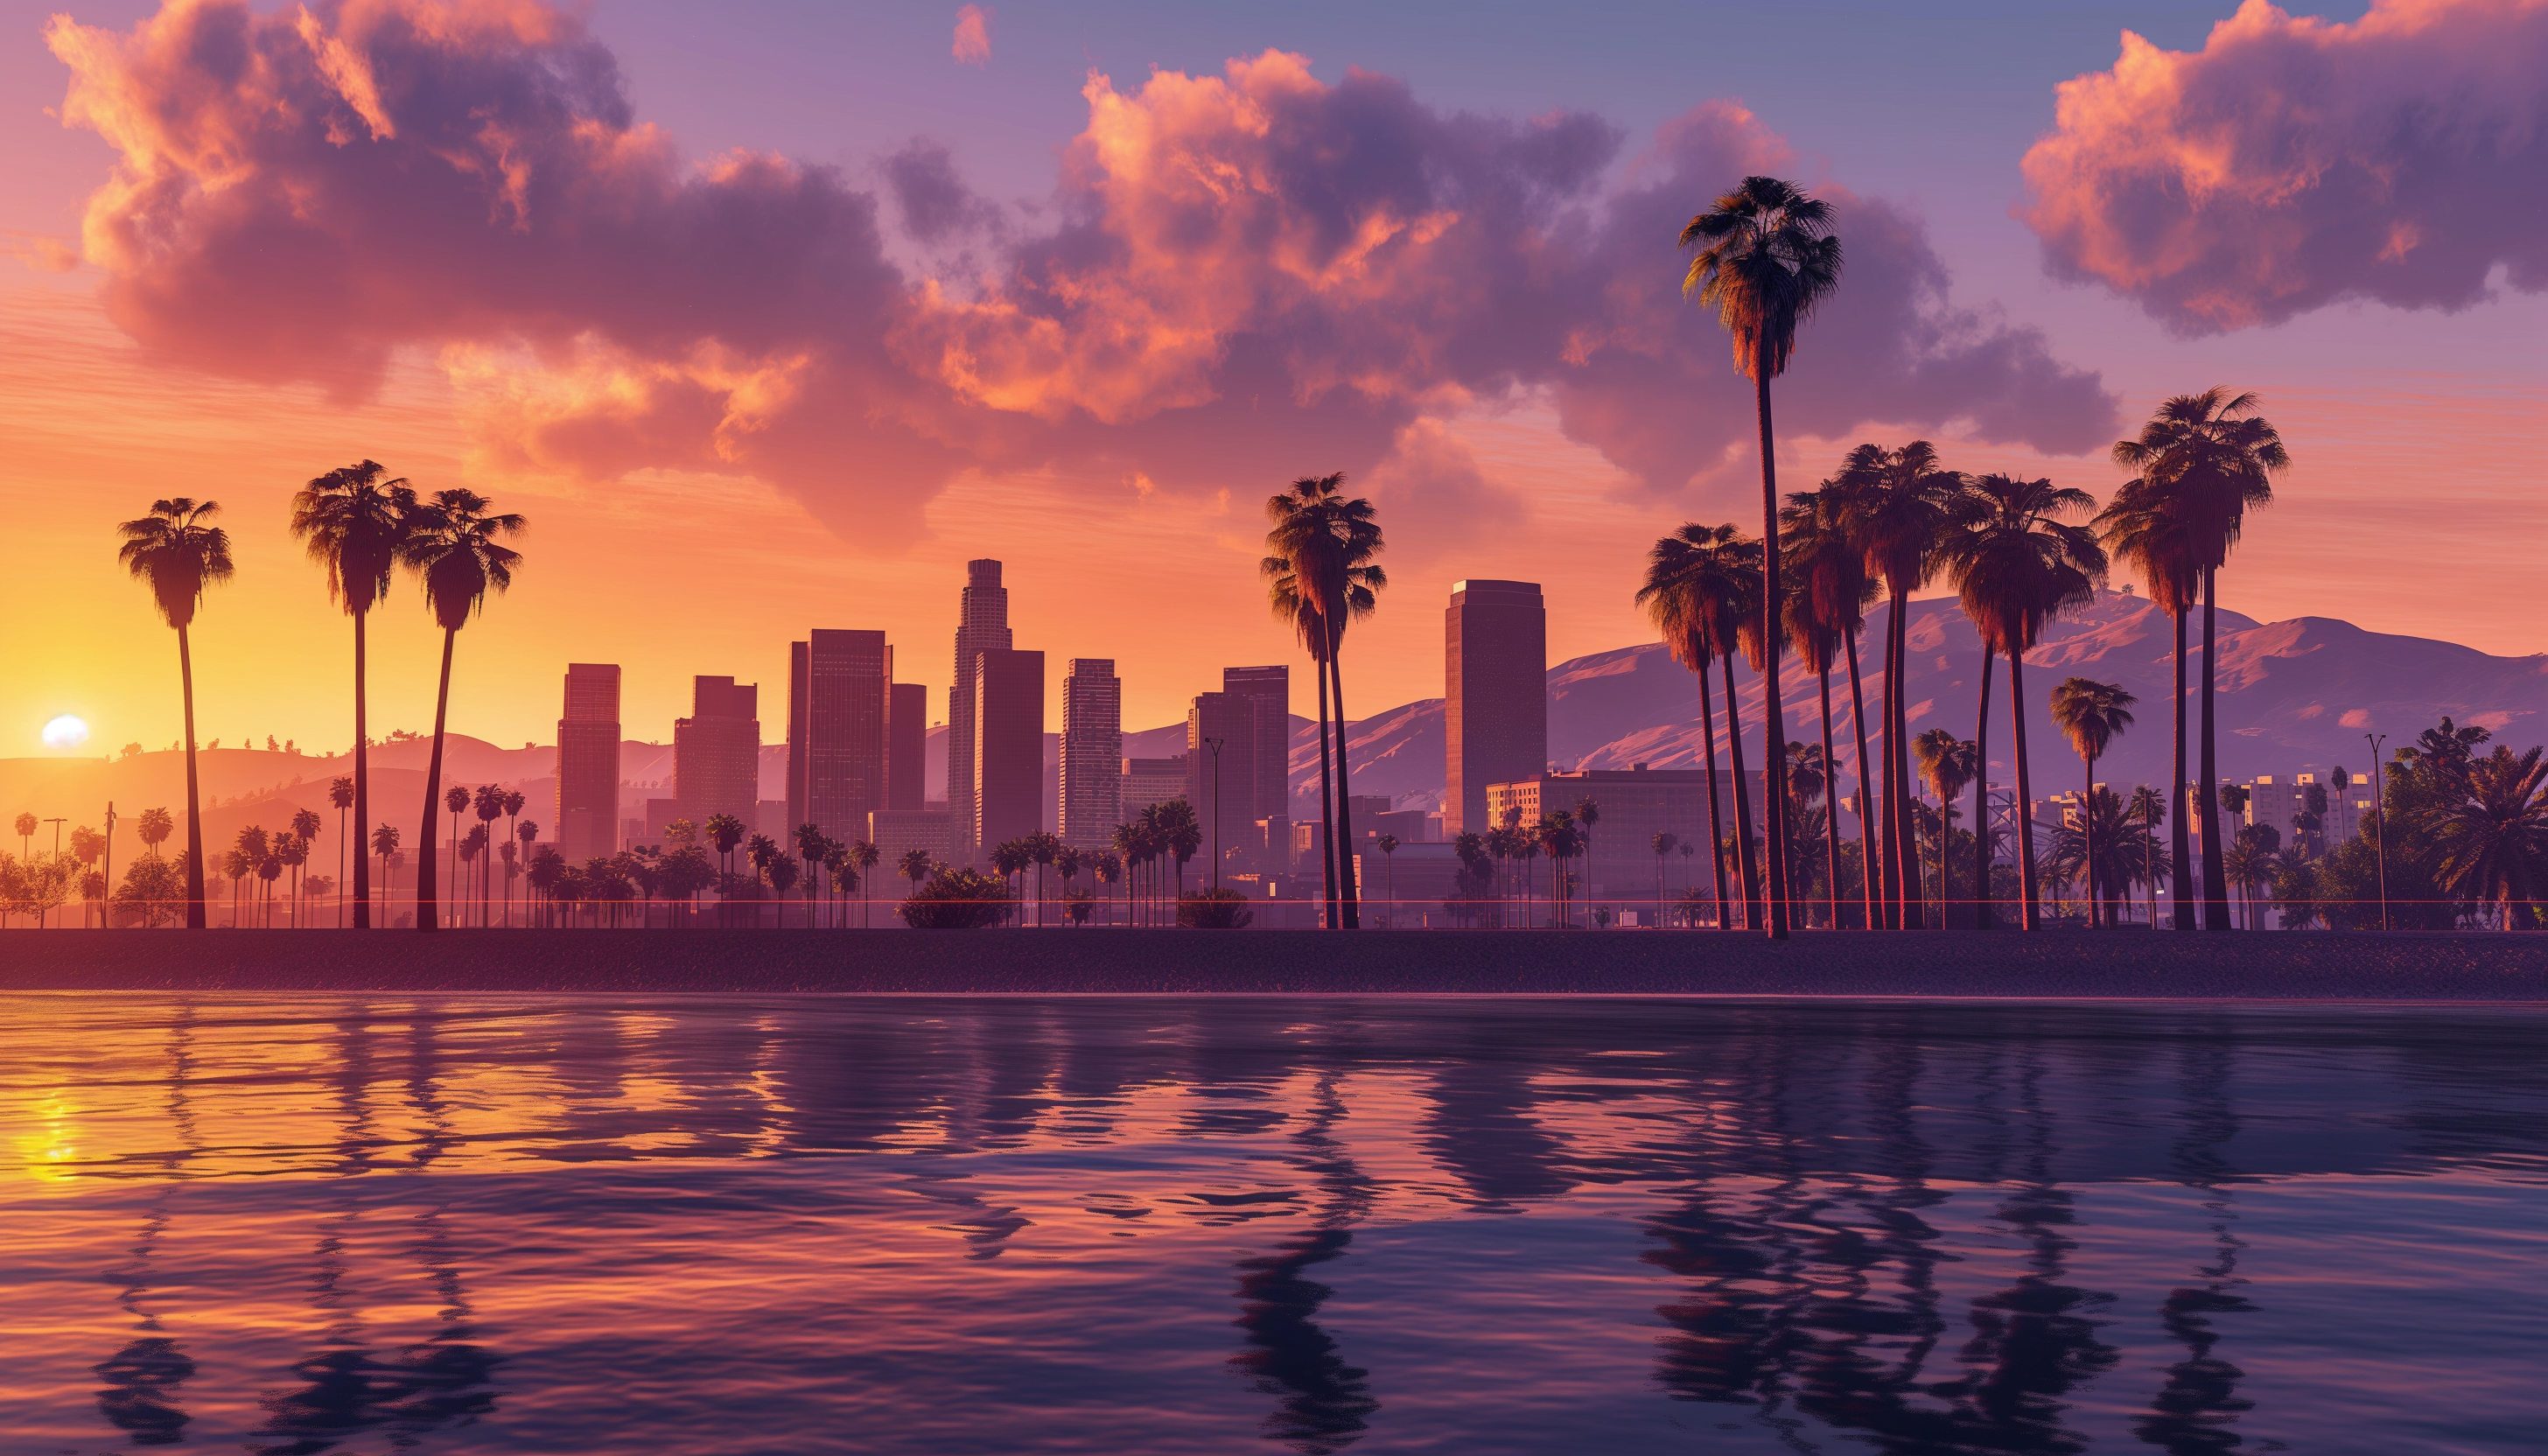 Los Santos skyline, a mix of city buildings, palm trees and water.